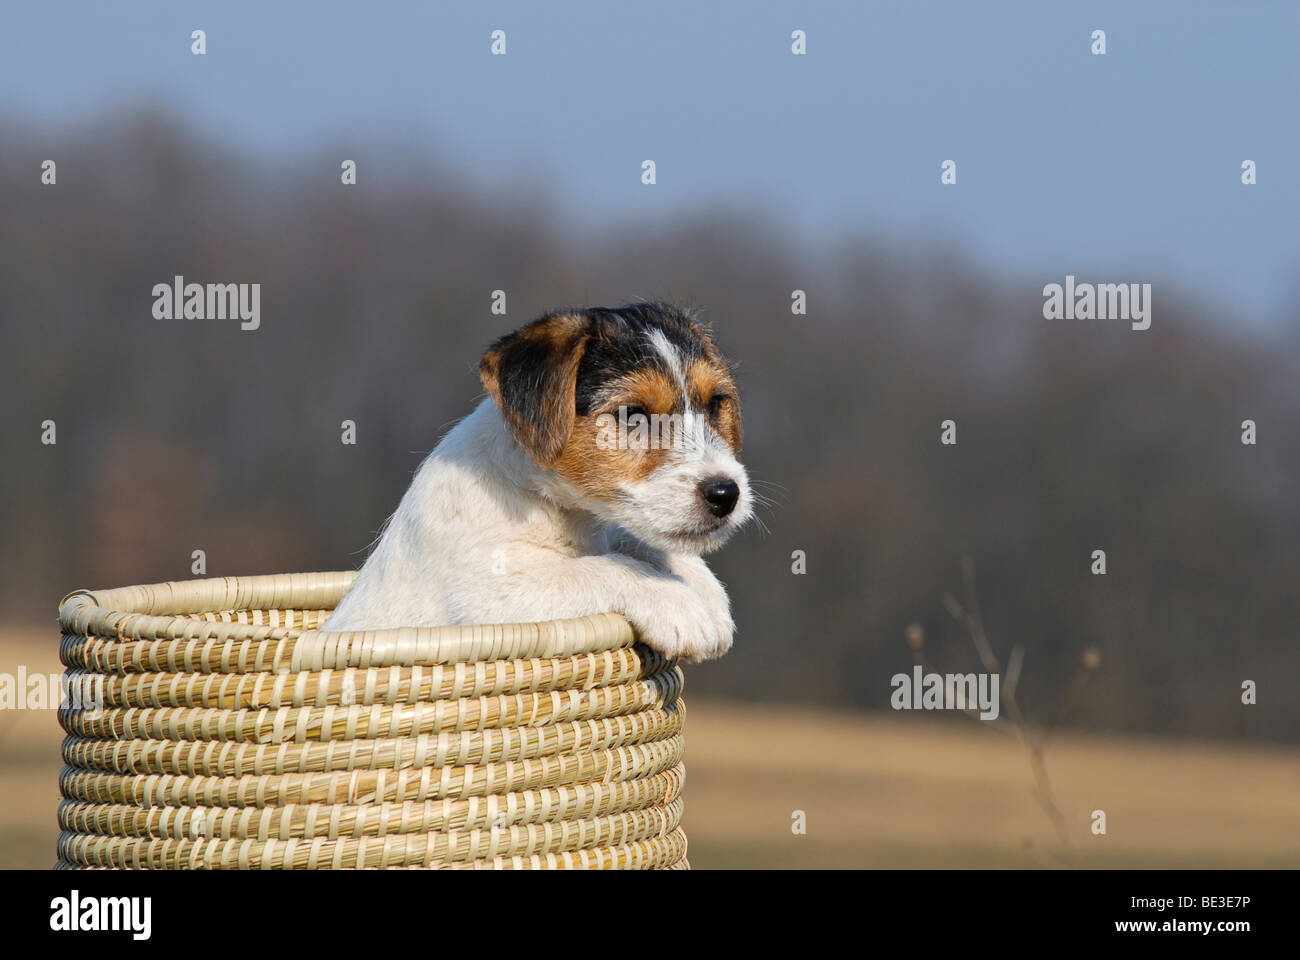 Jack Russell Terrier puppy sitting in a wicker basket Stock Photo